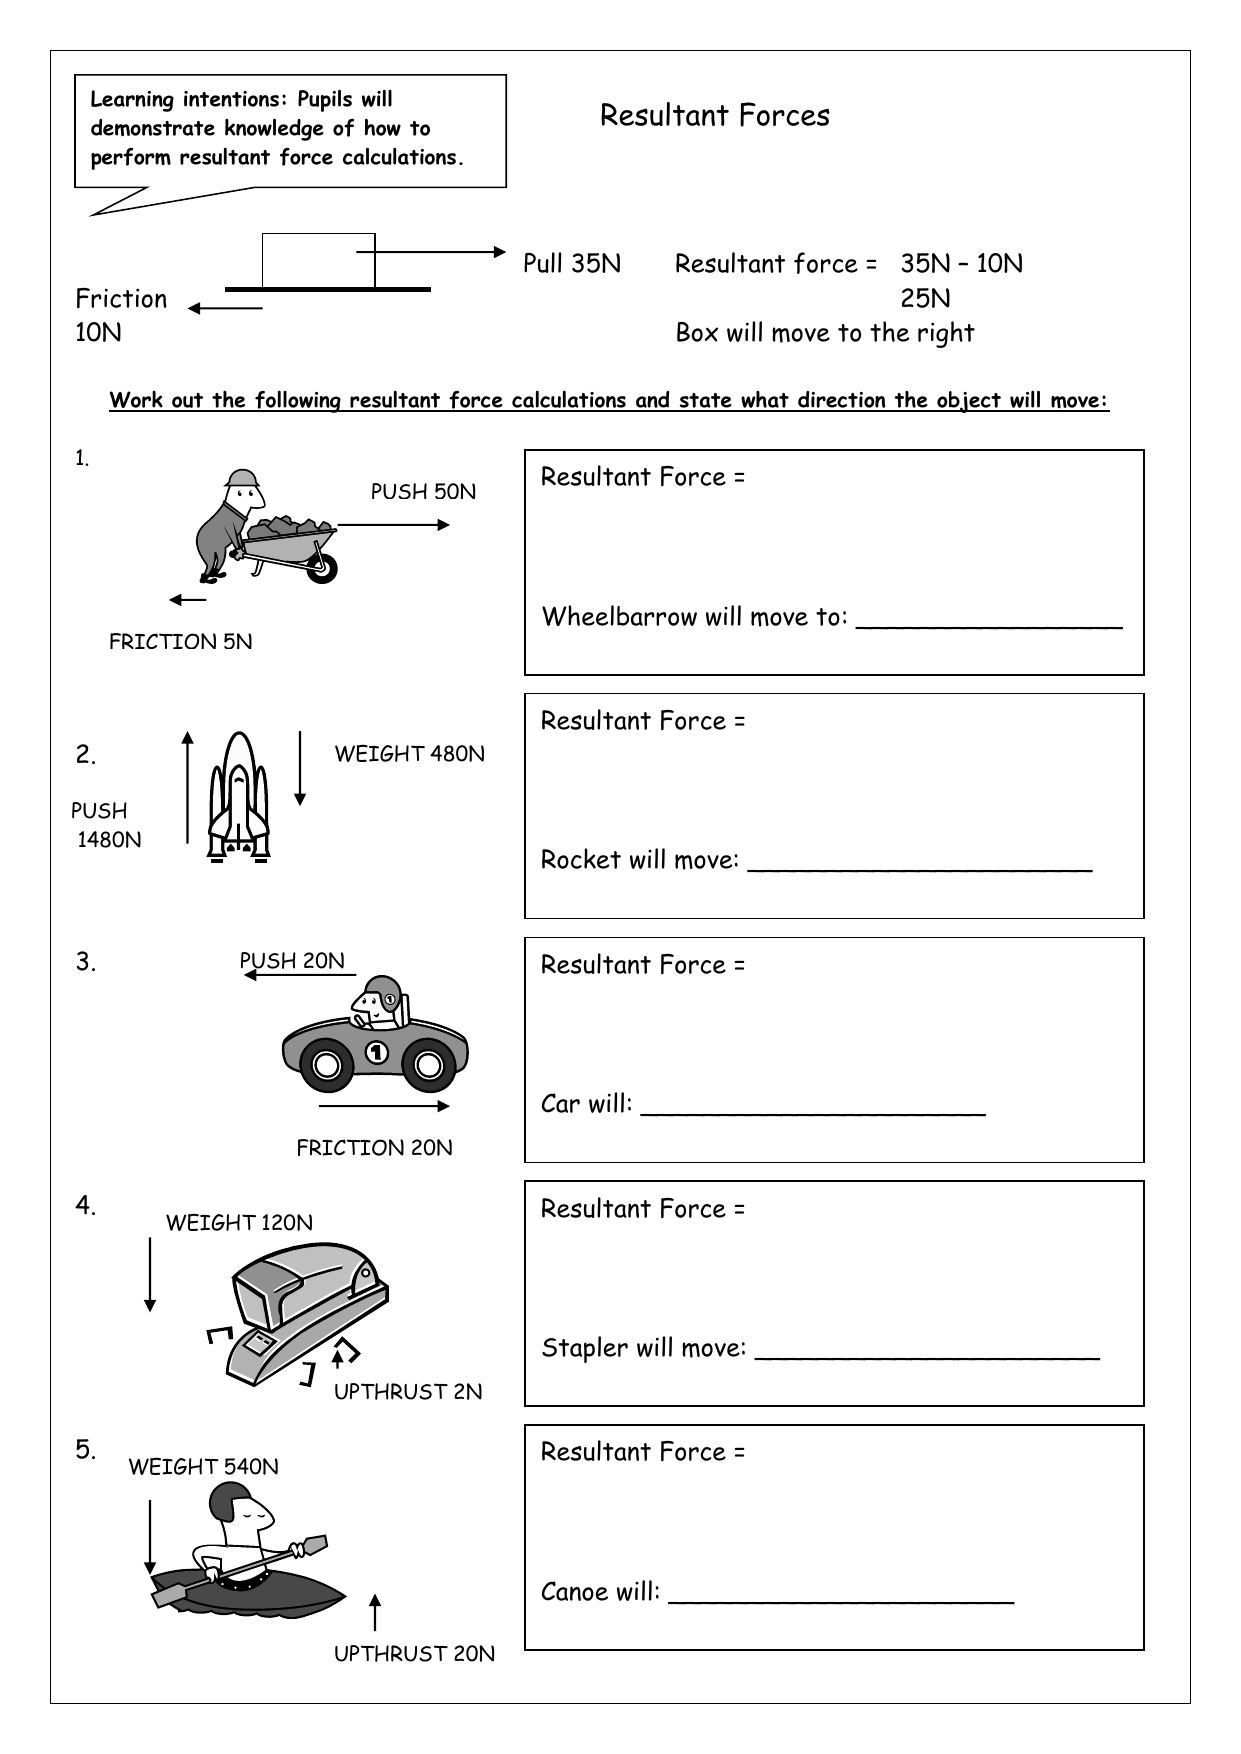 net-force-worksheet-answers